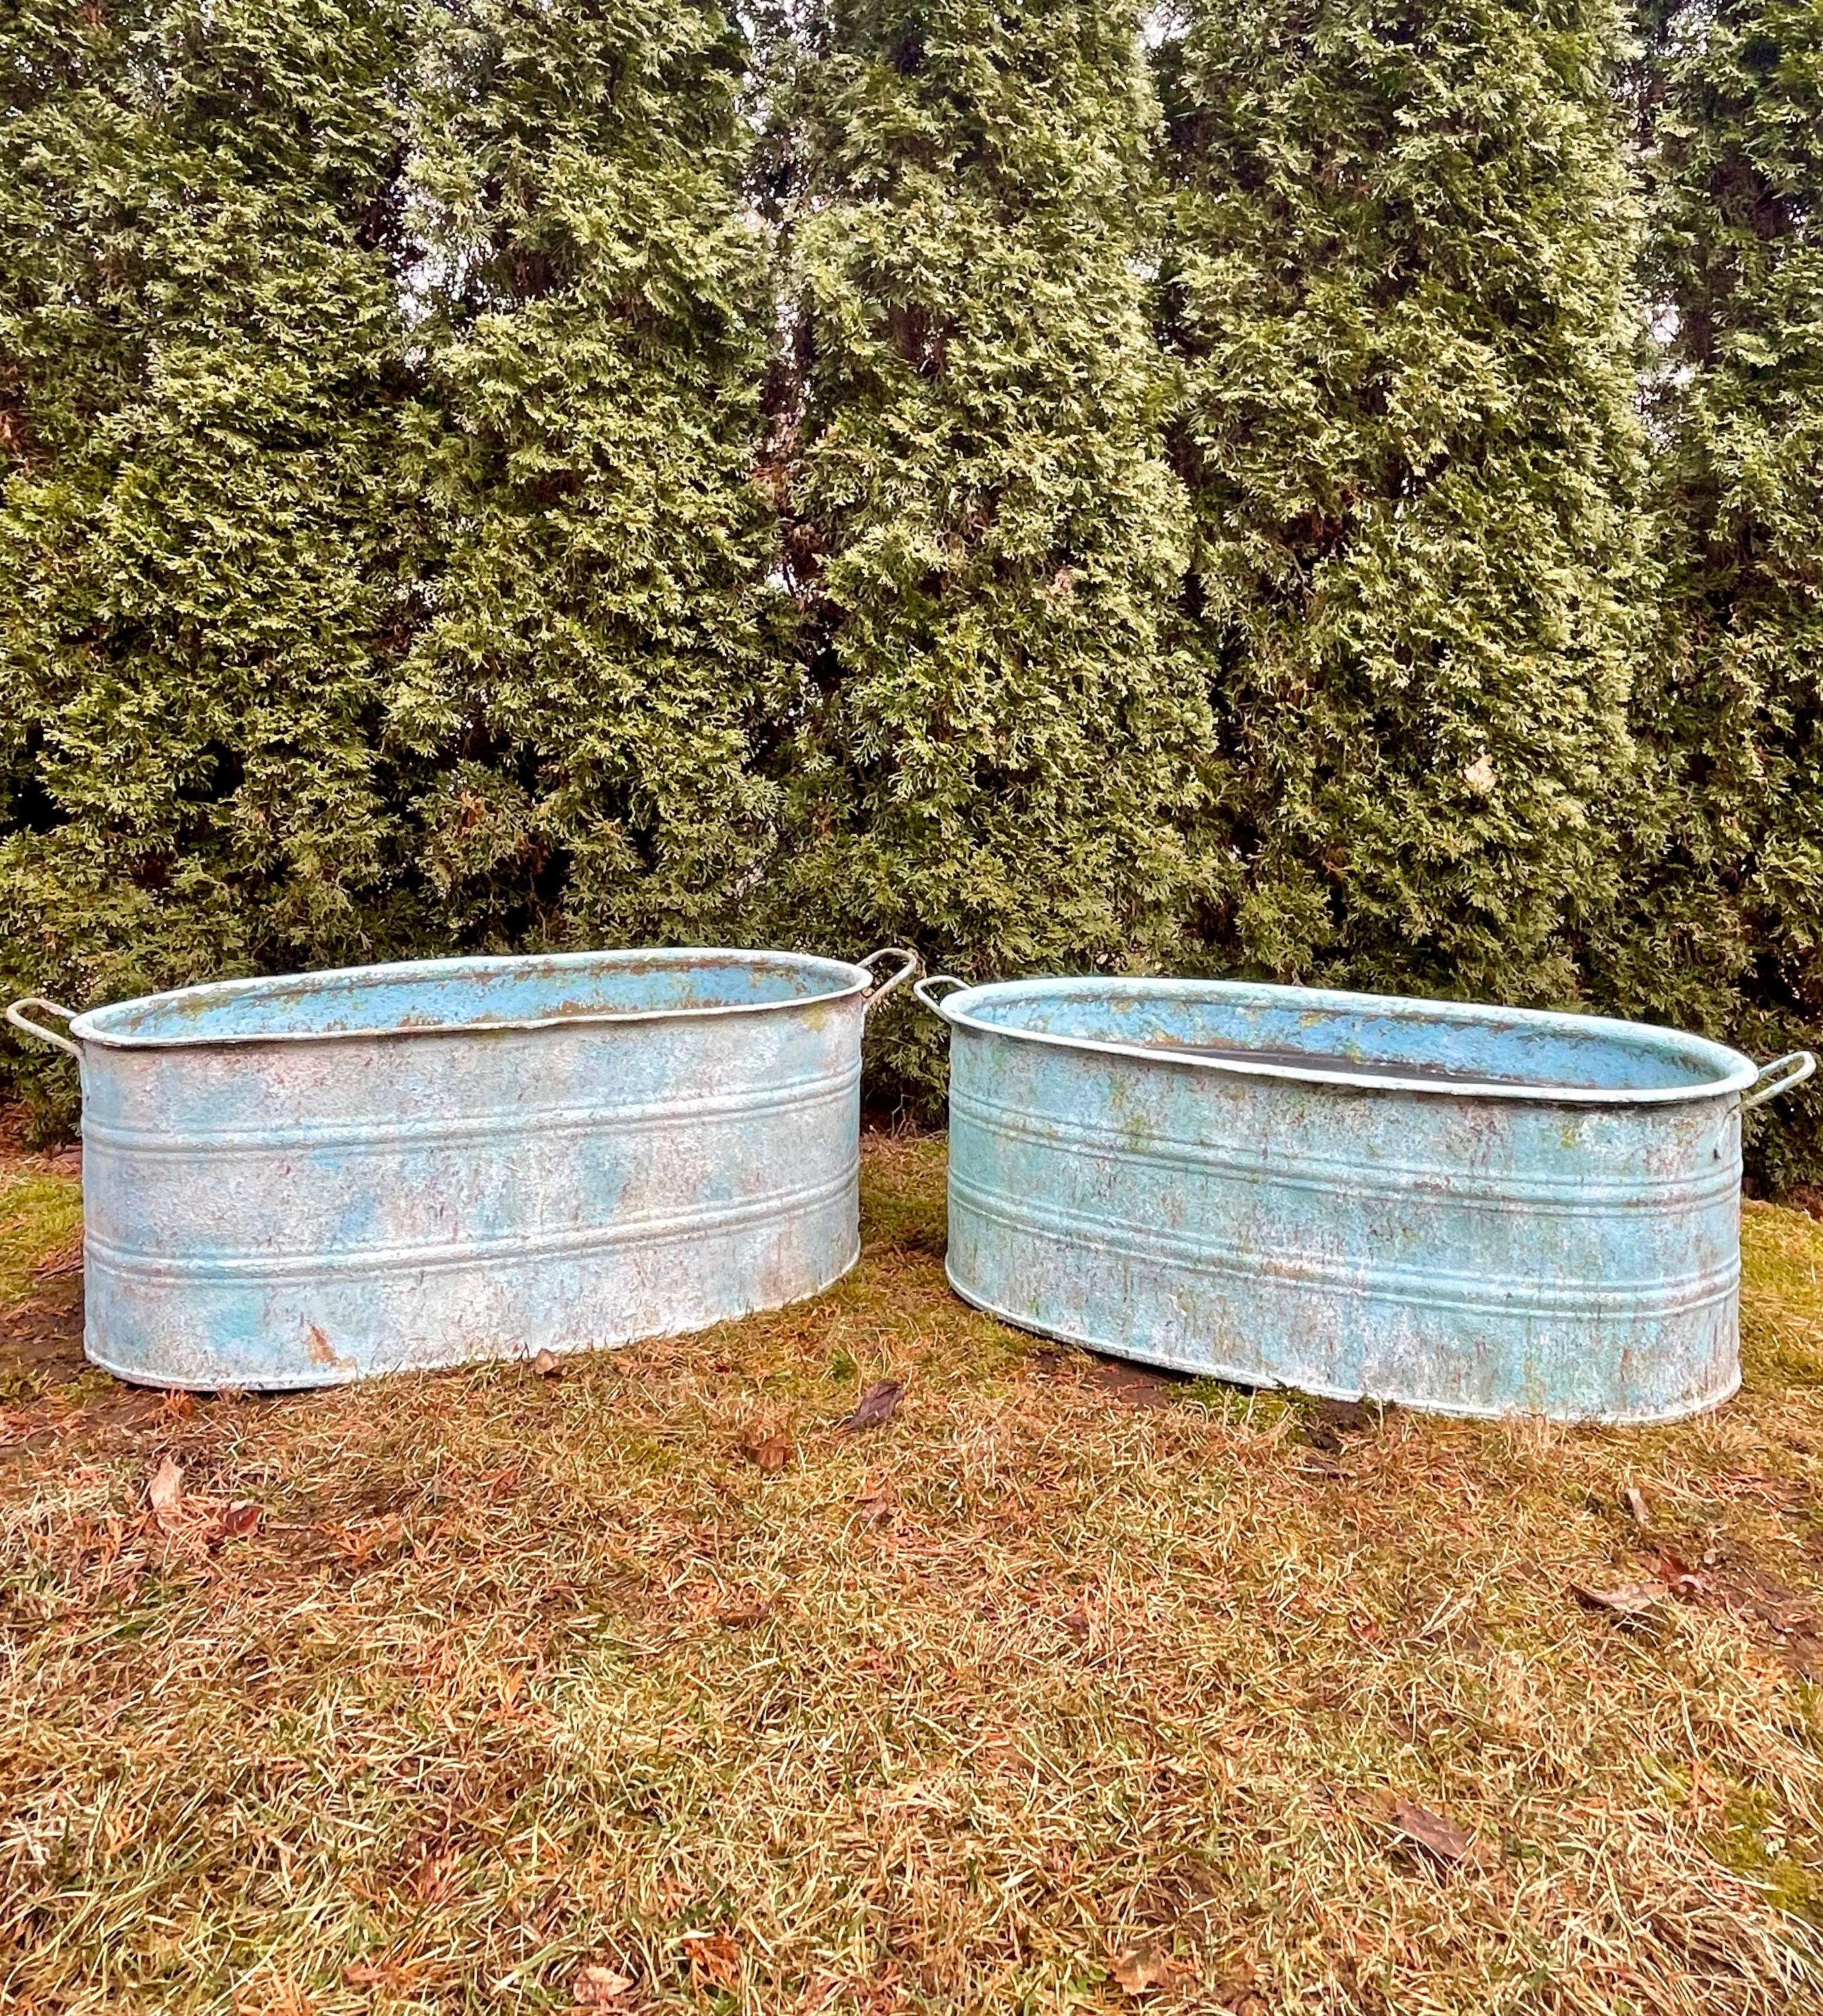 We were fortunate to source several near-pairs of these marvelous galvanized tub planters that date to the 1930s and had them custom-finished by a very talented artisan in Spain. This is one of three near-pairs that we have (the fourth near-pair is